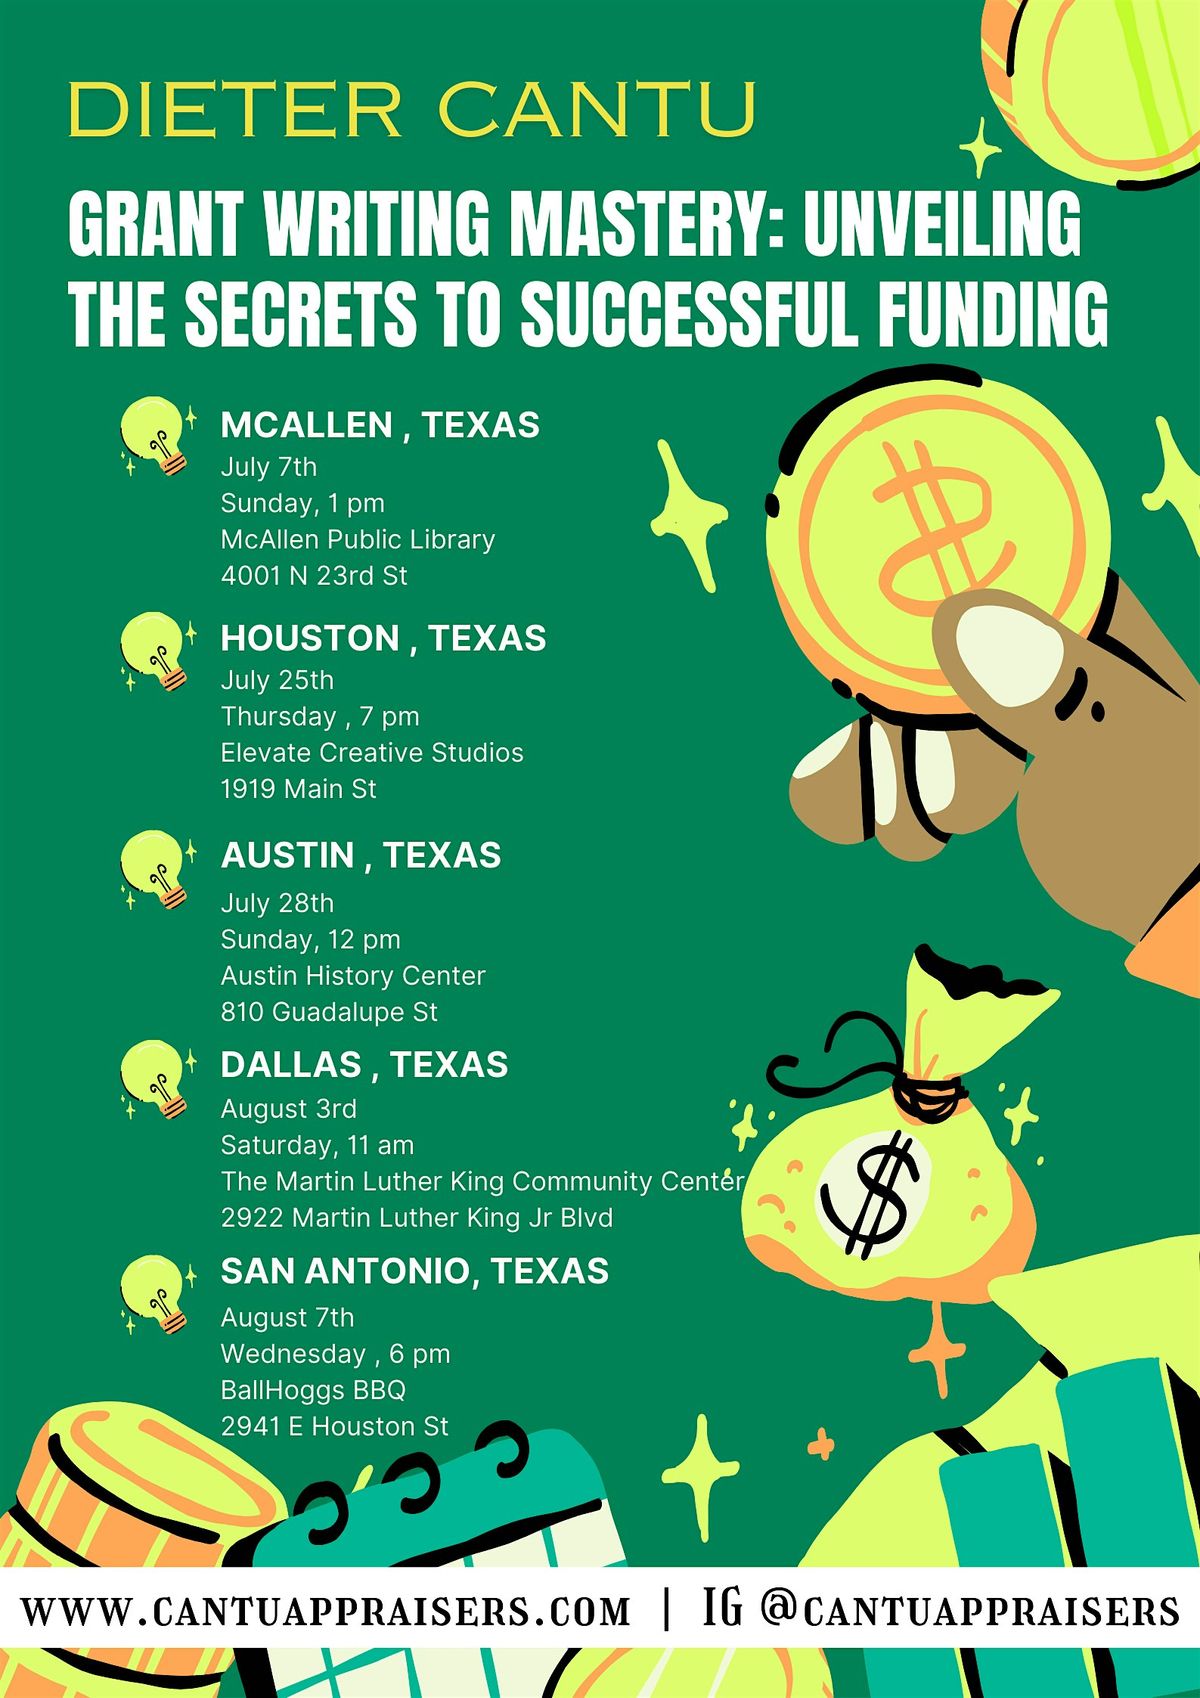 GRANT WRITING MASTERY UNVEILING THE SECRETS TO SUCCESSFUL FUNDING (SA TX)